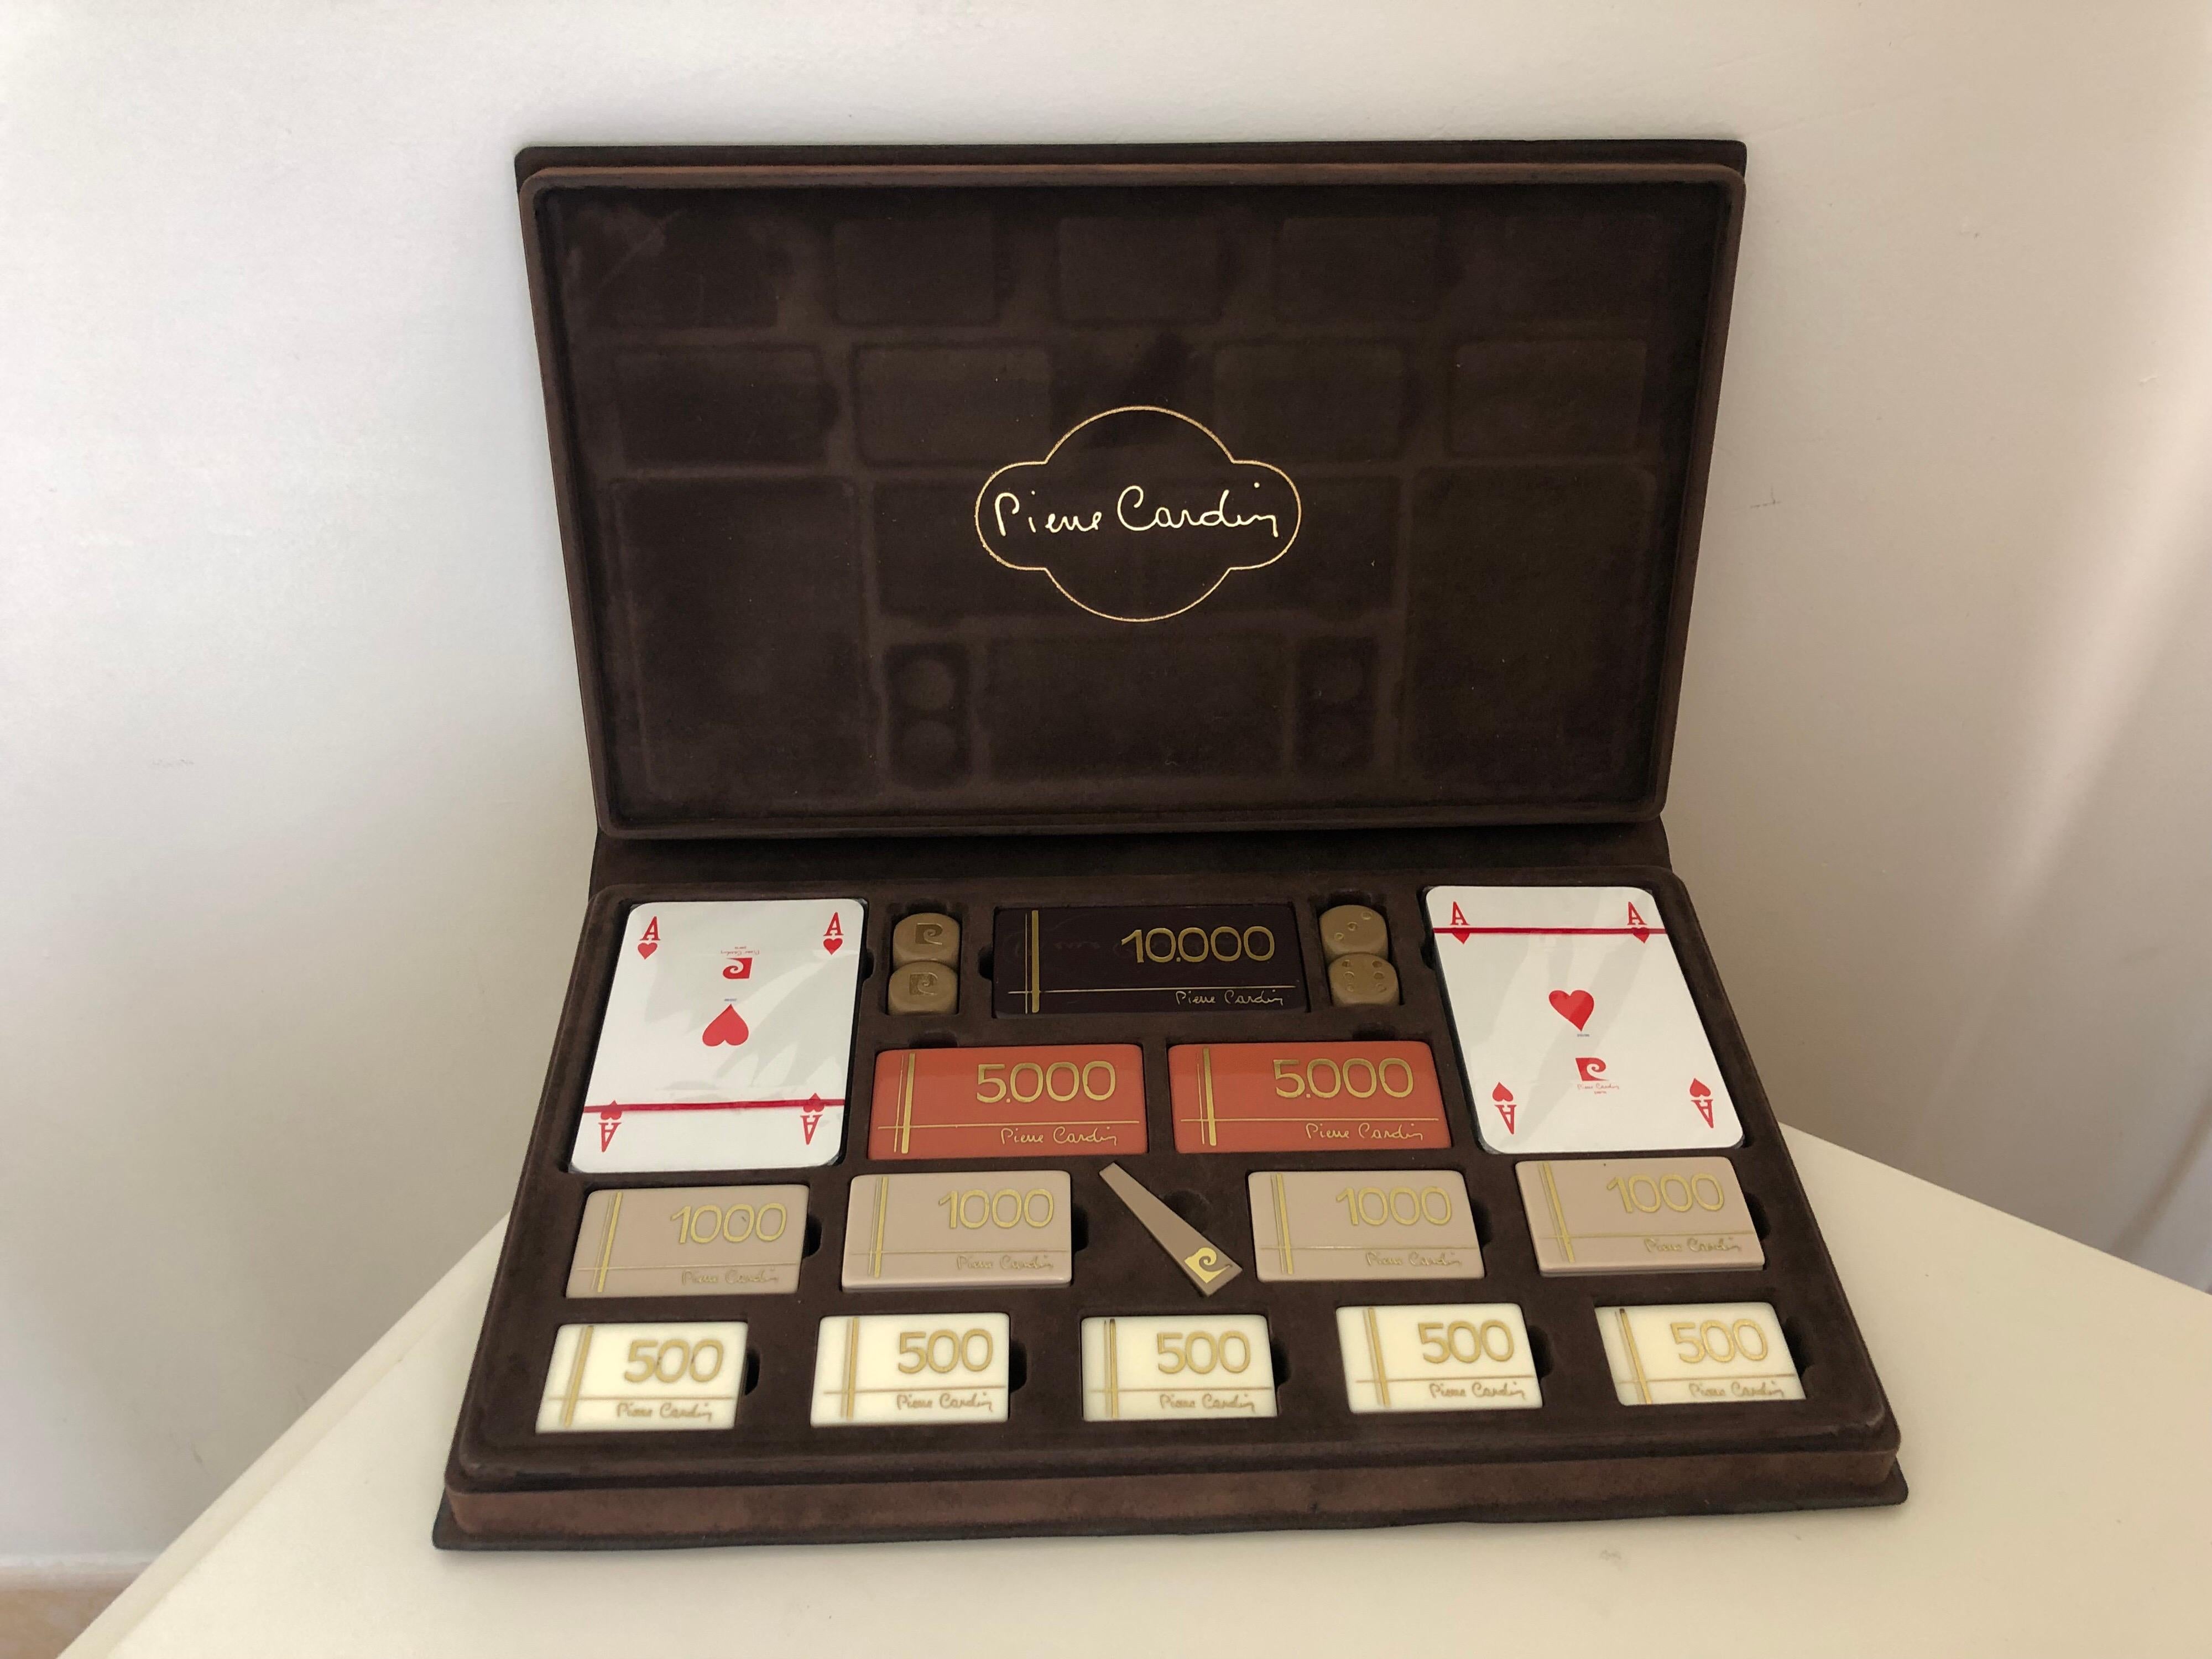 Playing card set signed Pierre Cardin
Brown velvet case
Two packs of cards still sealed,
chips and dices never used.